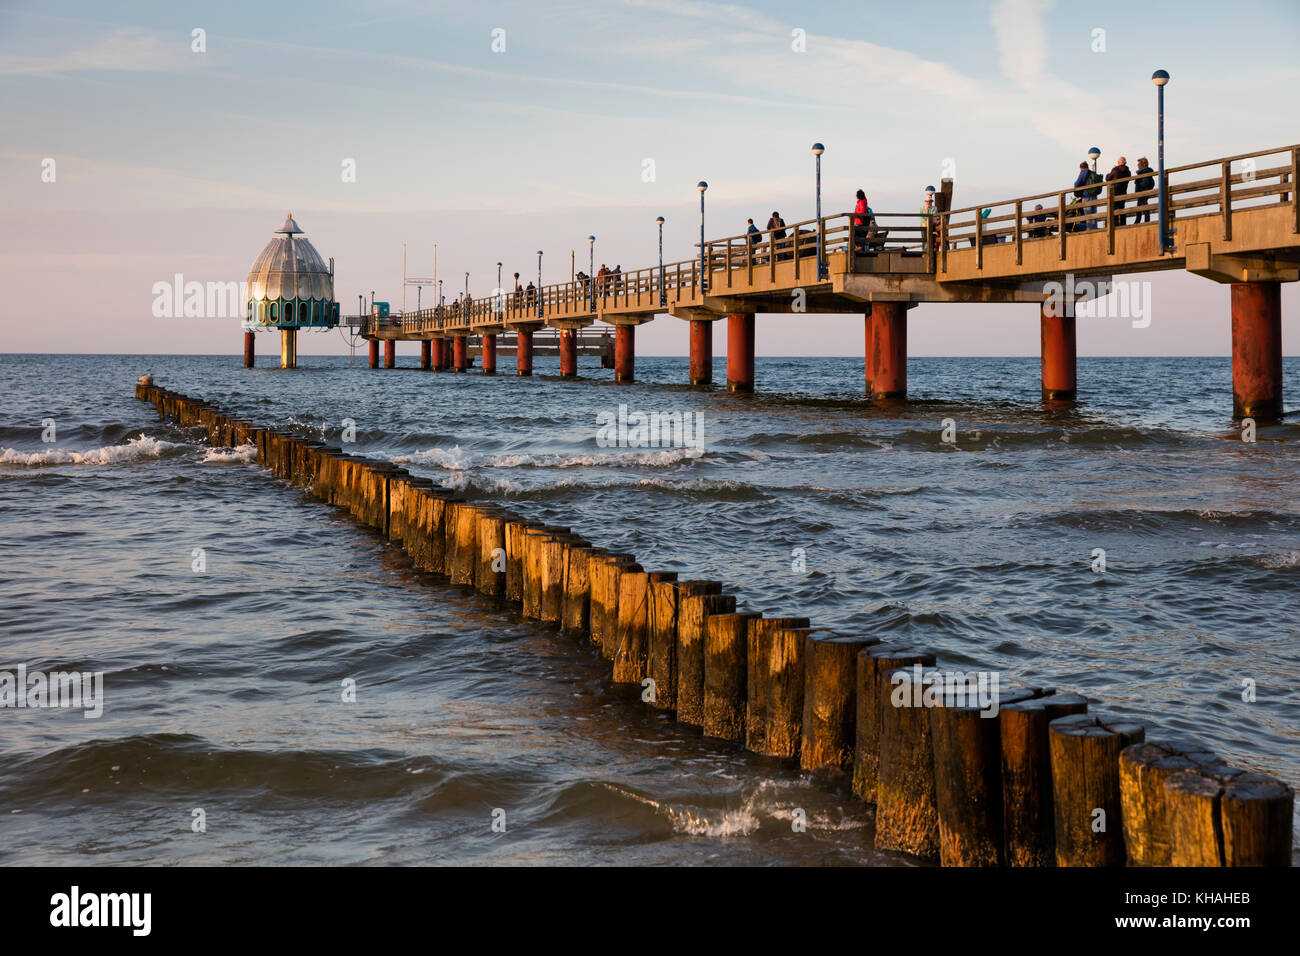 seebrucke photography images Zingst Alamy and stock hi-res -